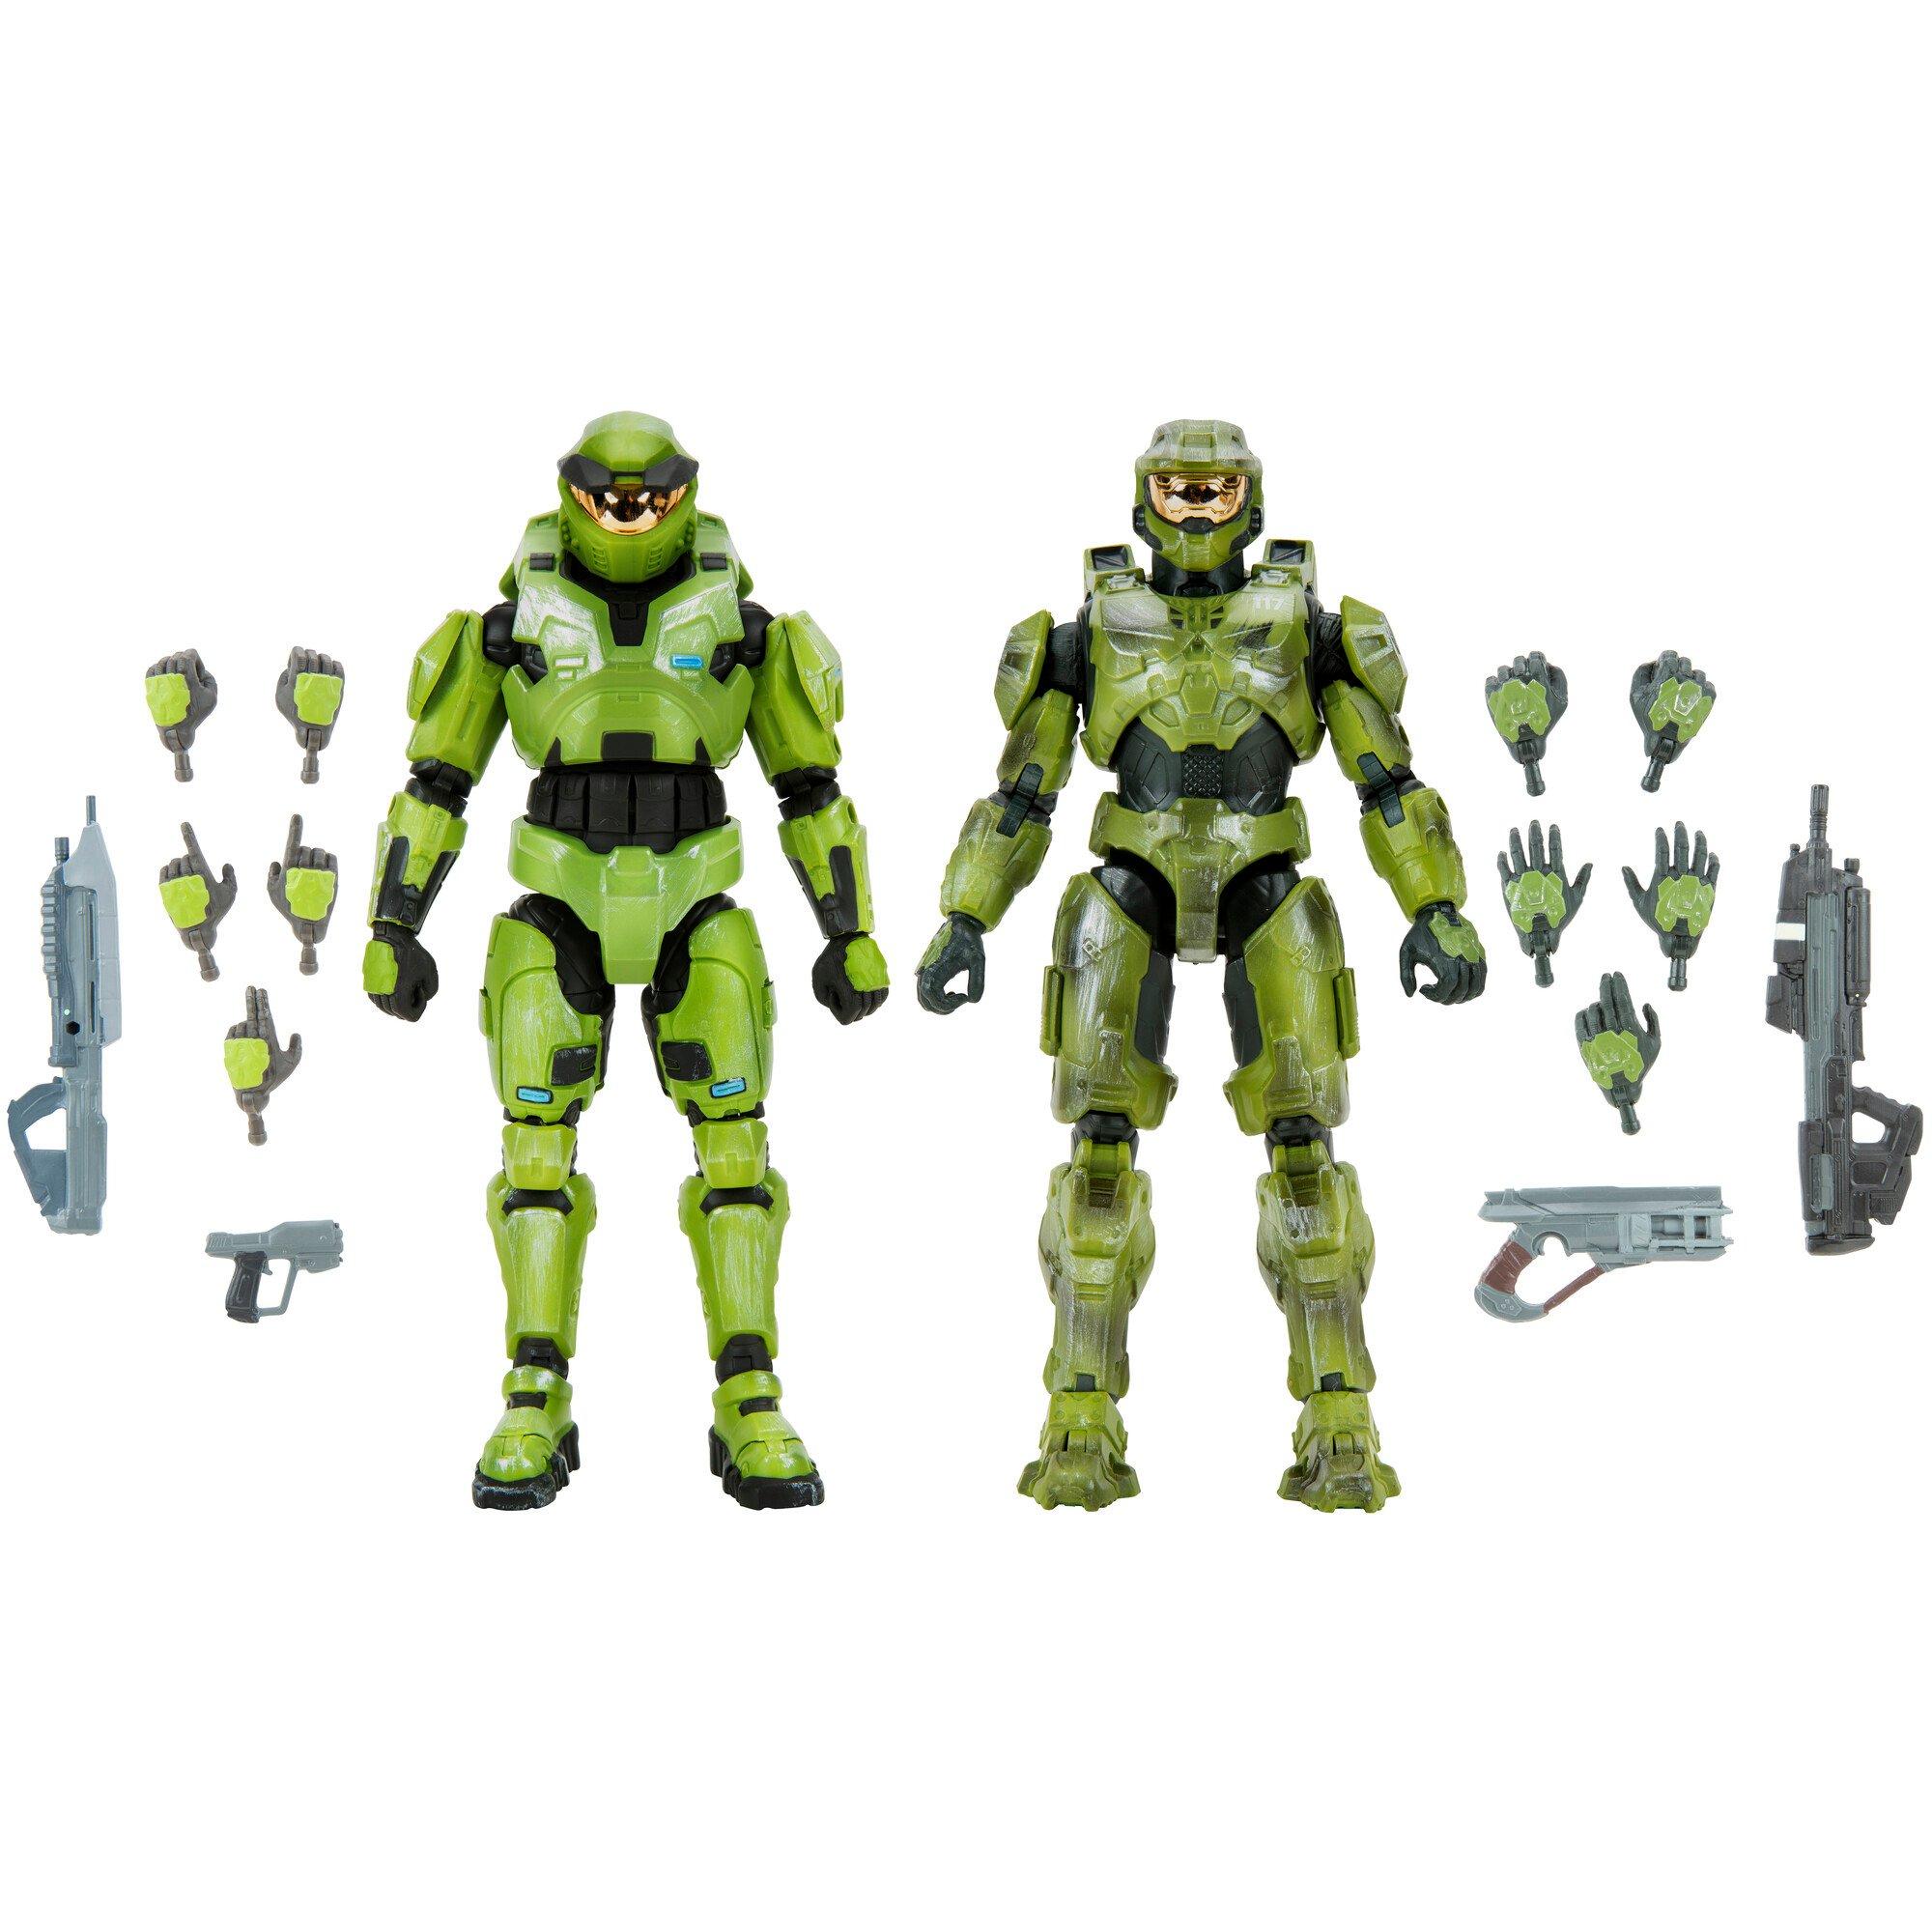 jazwares-halo-master-chief-20th-anniversary-spartan-collection-set-6-5-in-action-figure-gamestop